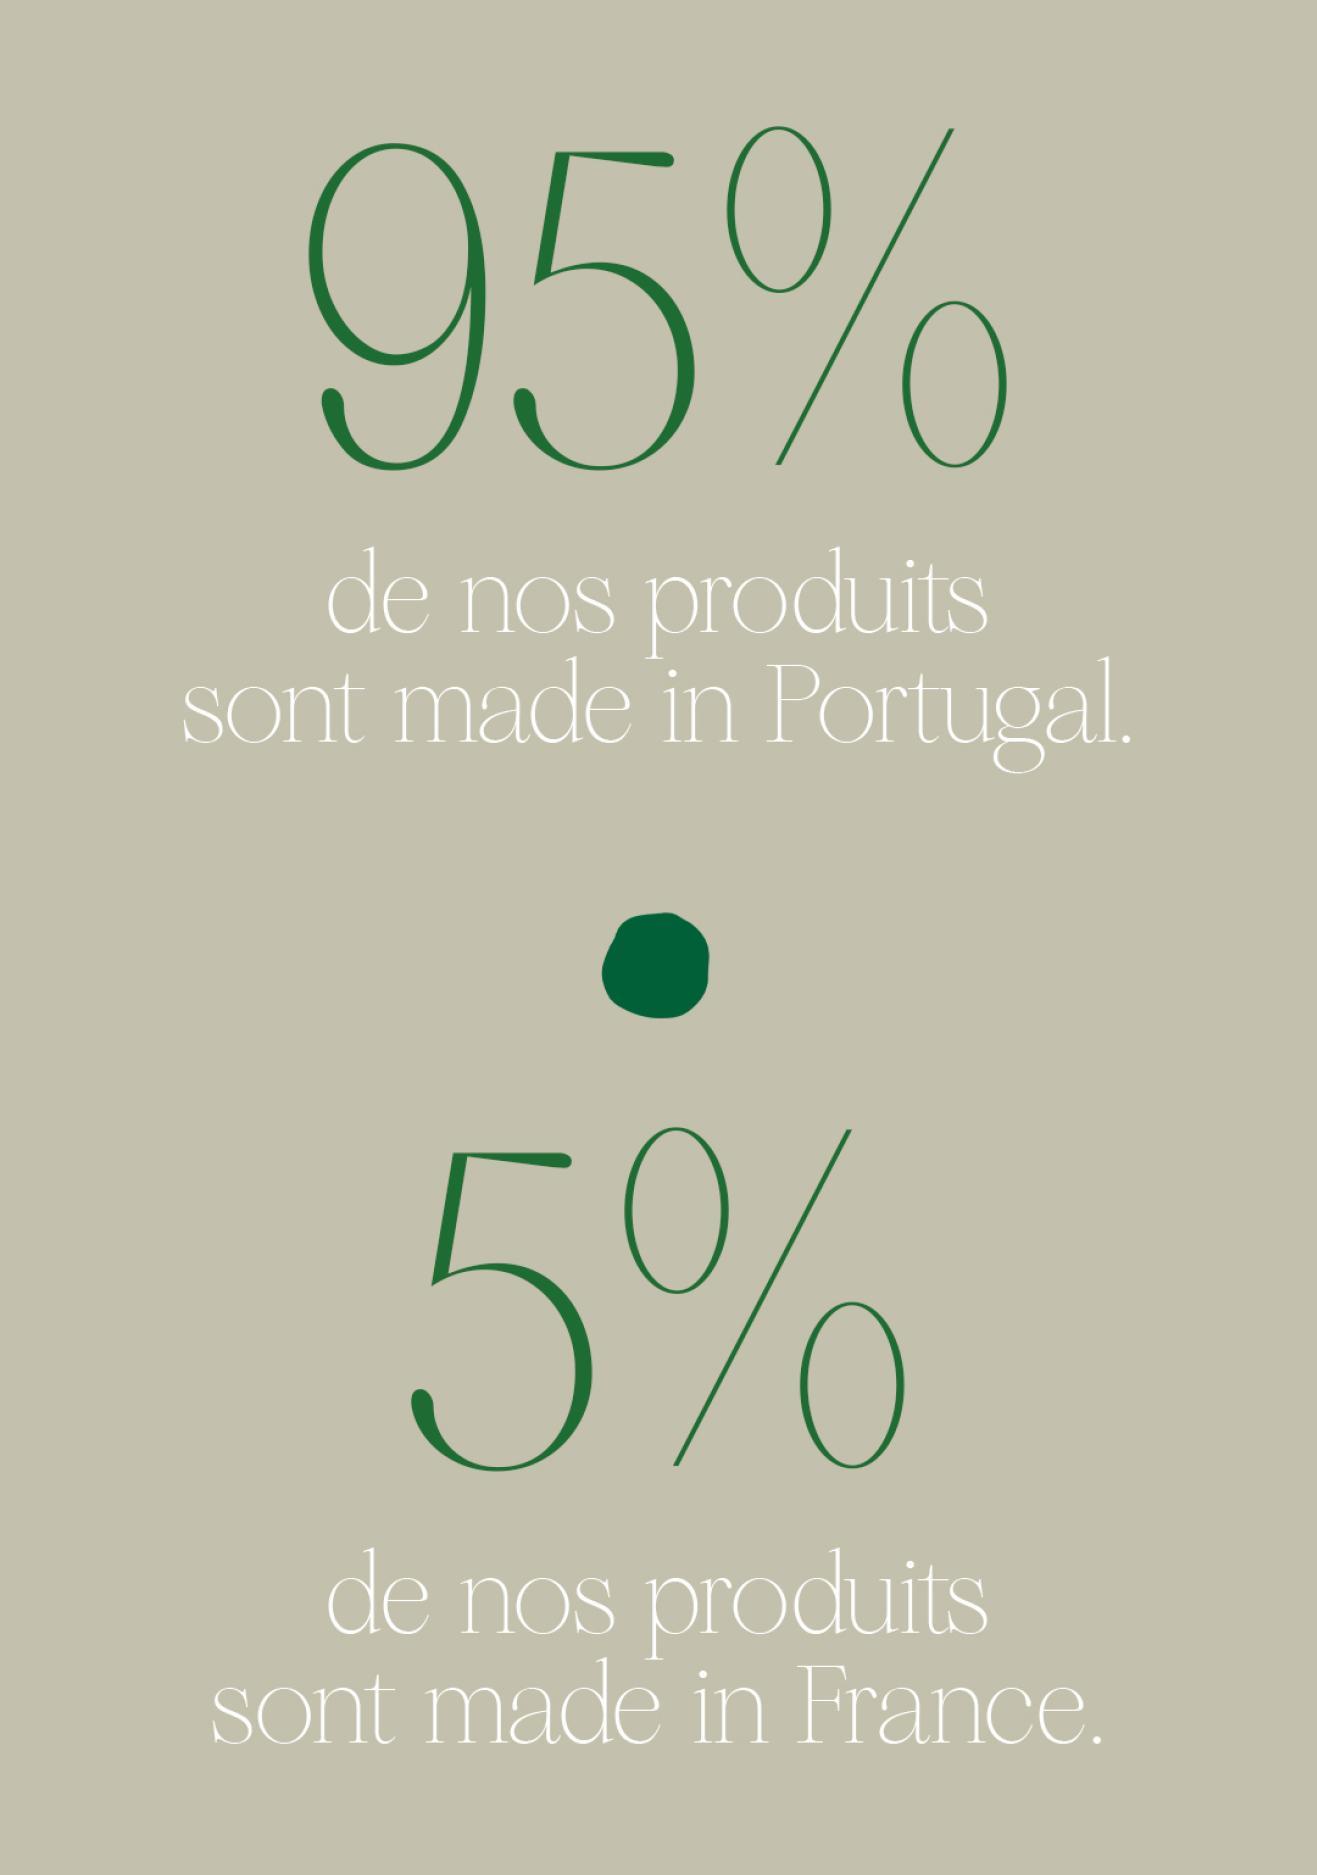 Produits made in Portugal et made in France